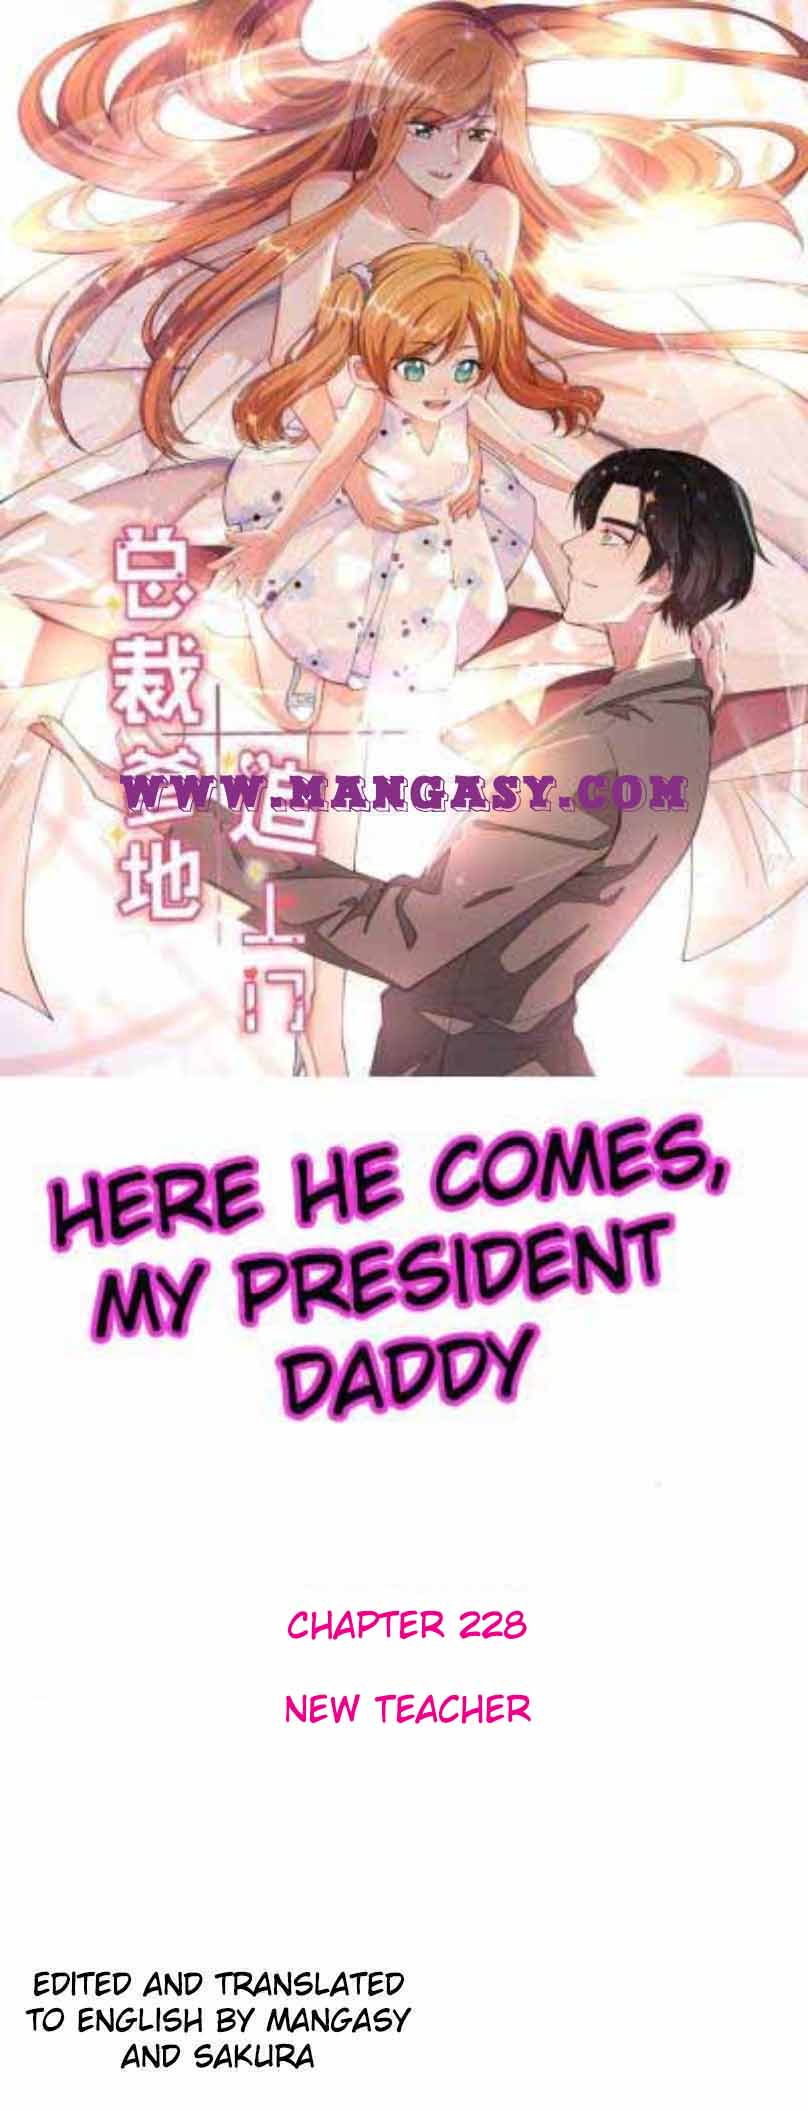 President Daddy Is Chasing You - Page 2